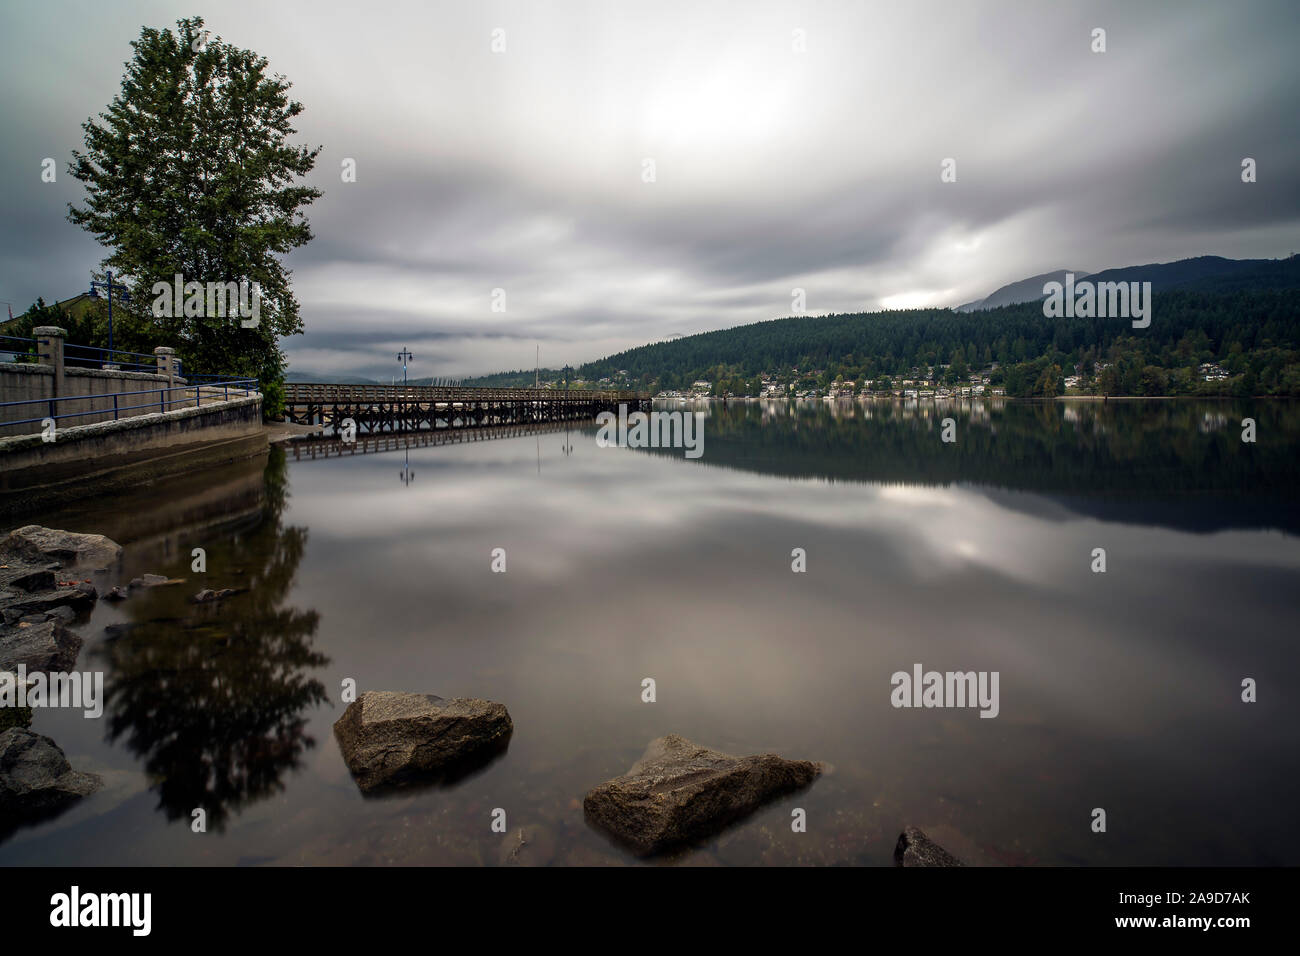 Beautiful view over Burrard Inlet at high tide in Rocky Point Park, Port Moody, B.C., Canada Stock Photo